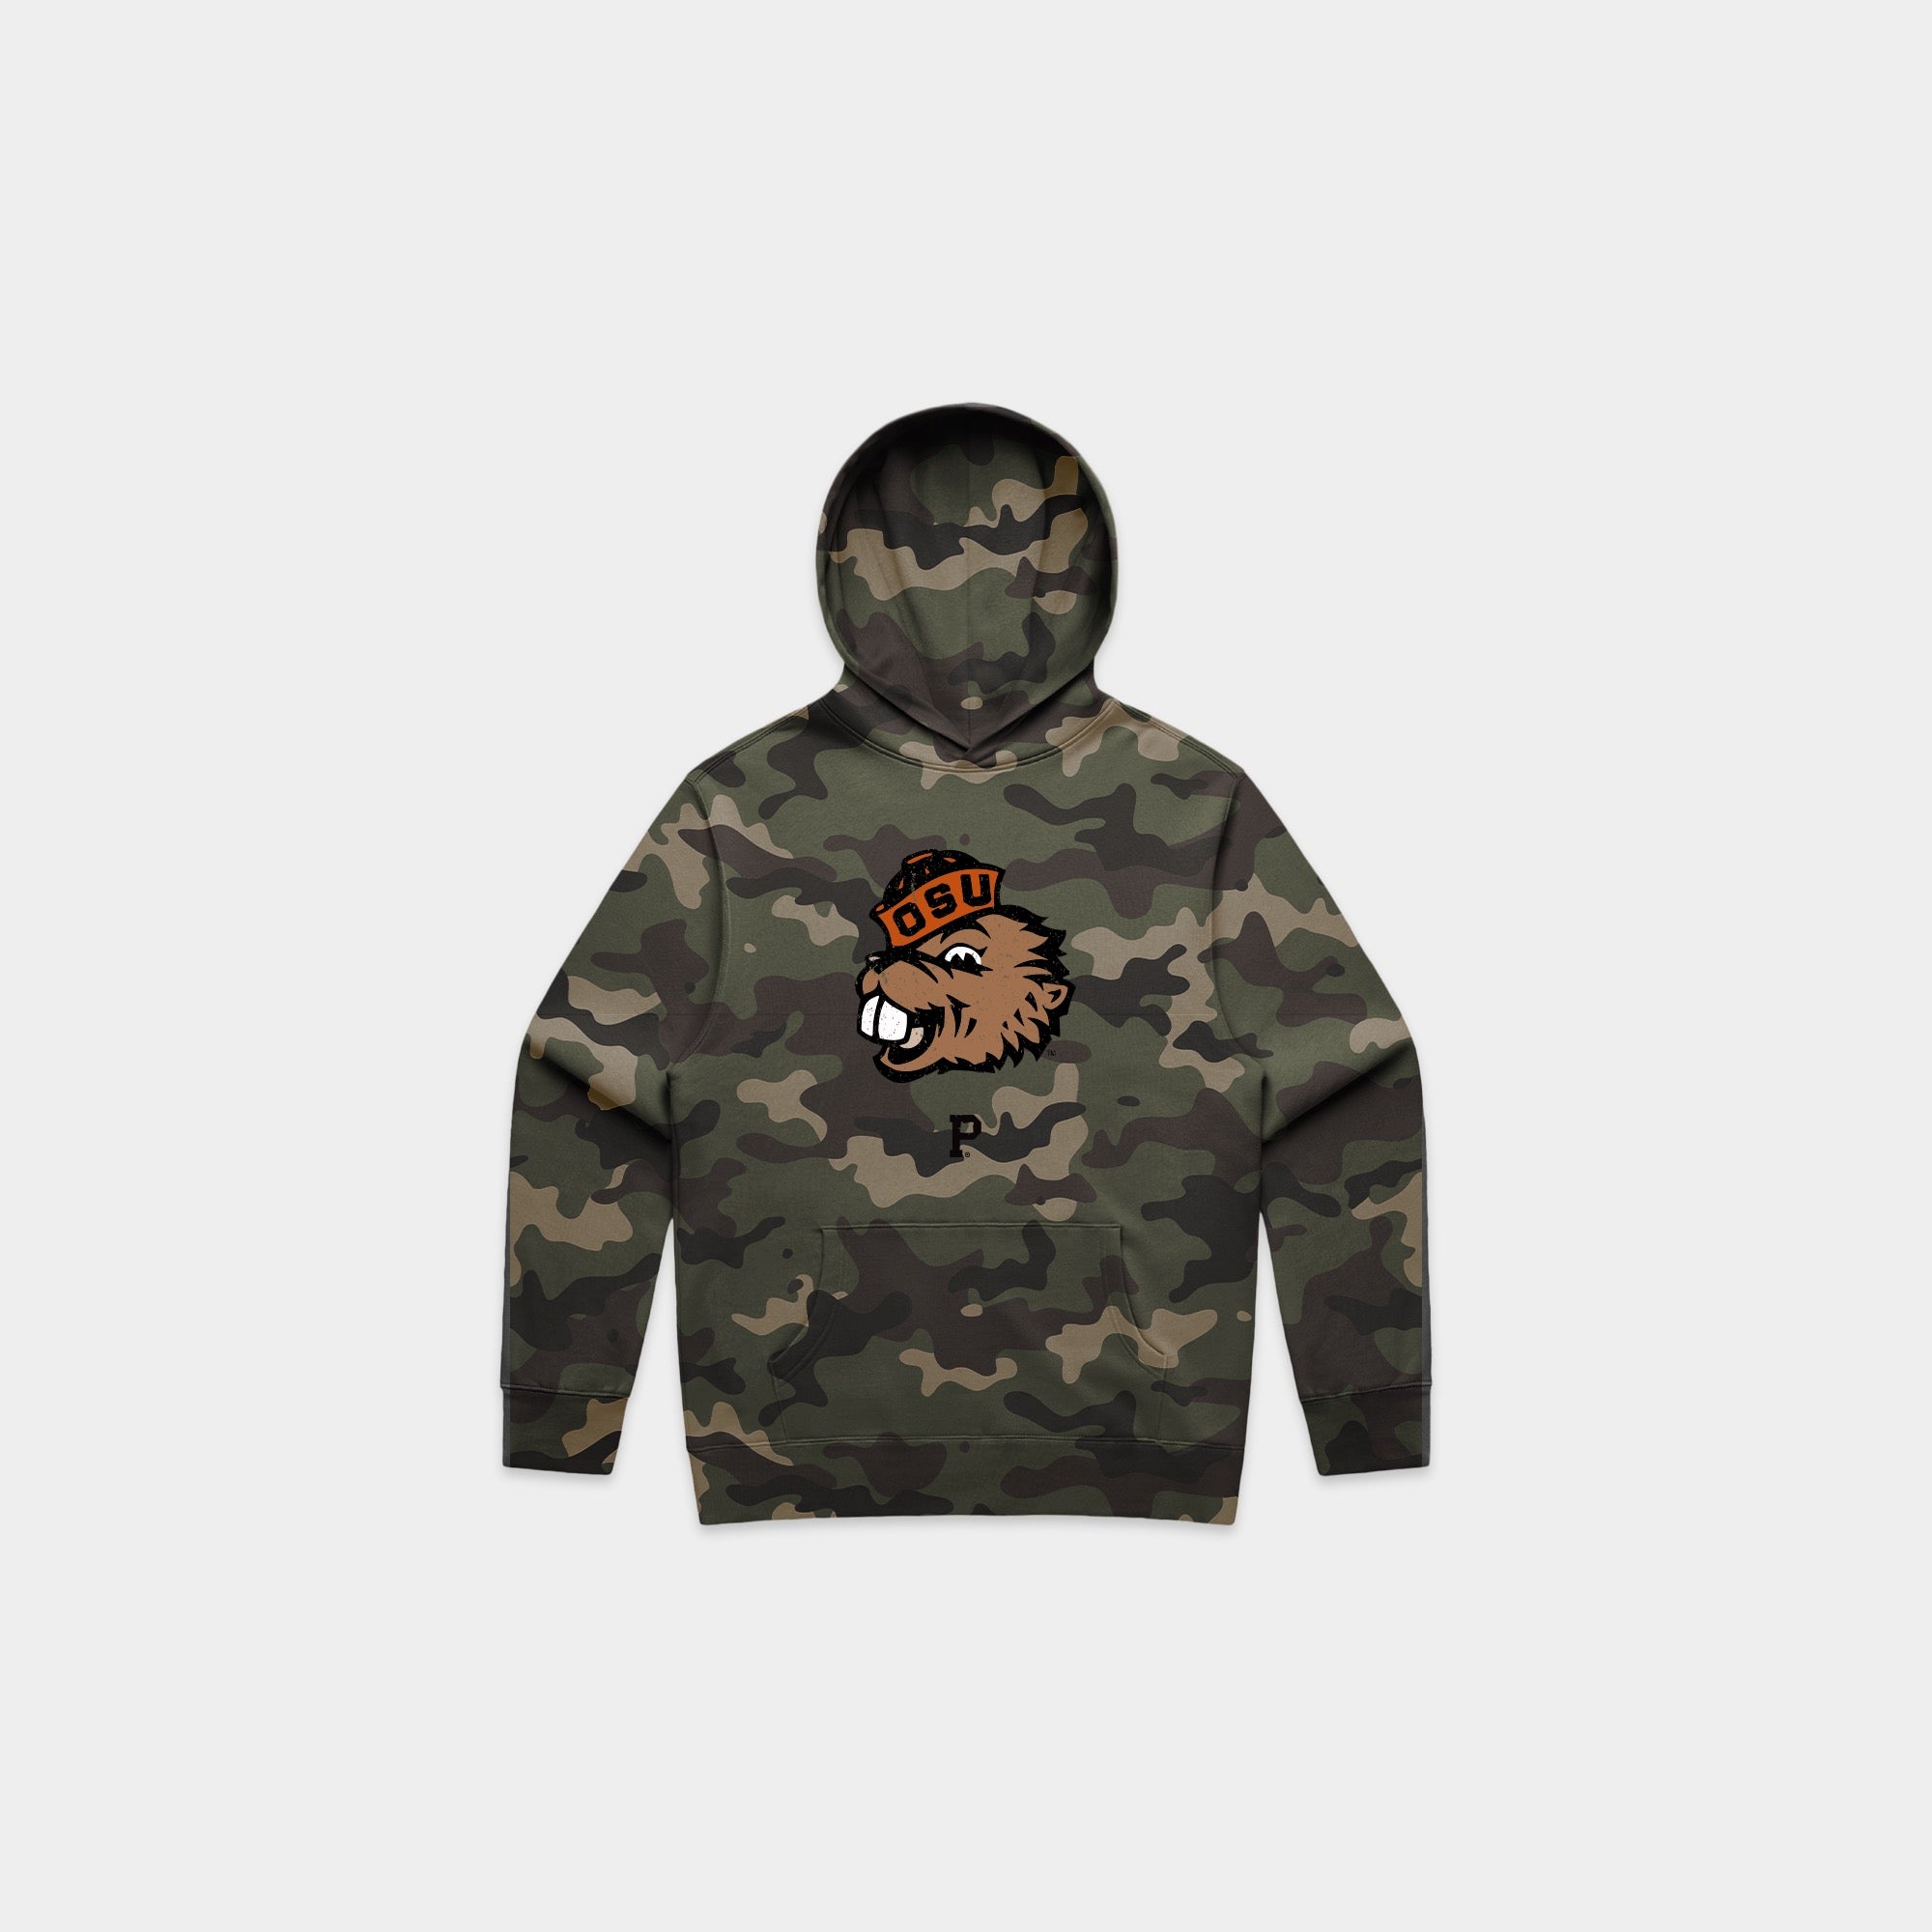 Youth Soft-Blend Benny Hoodie